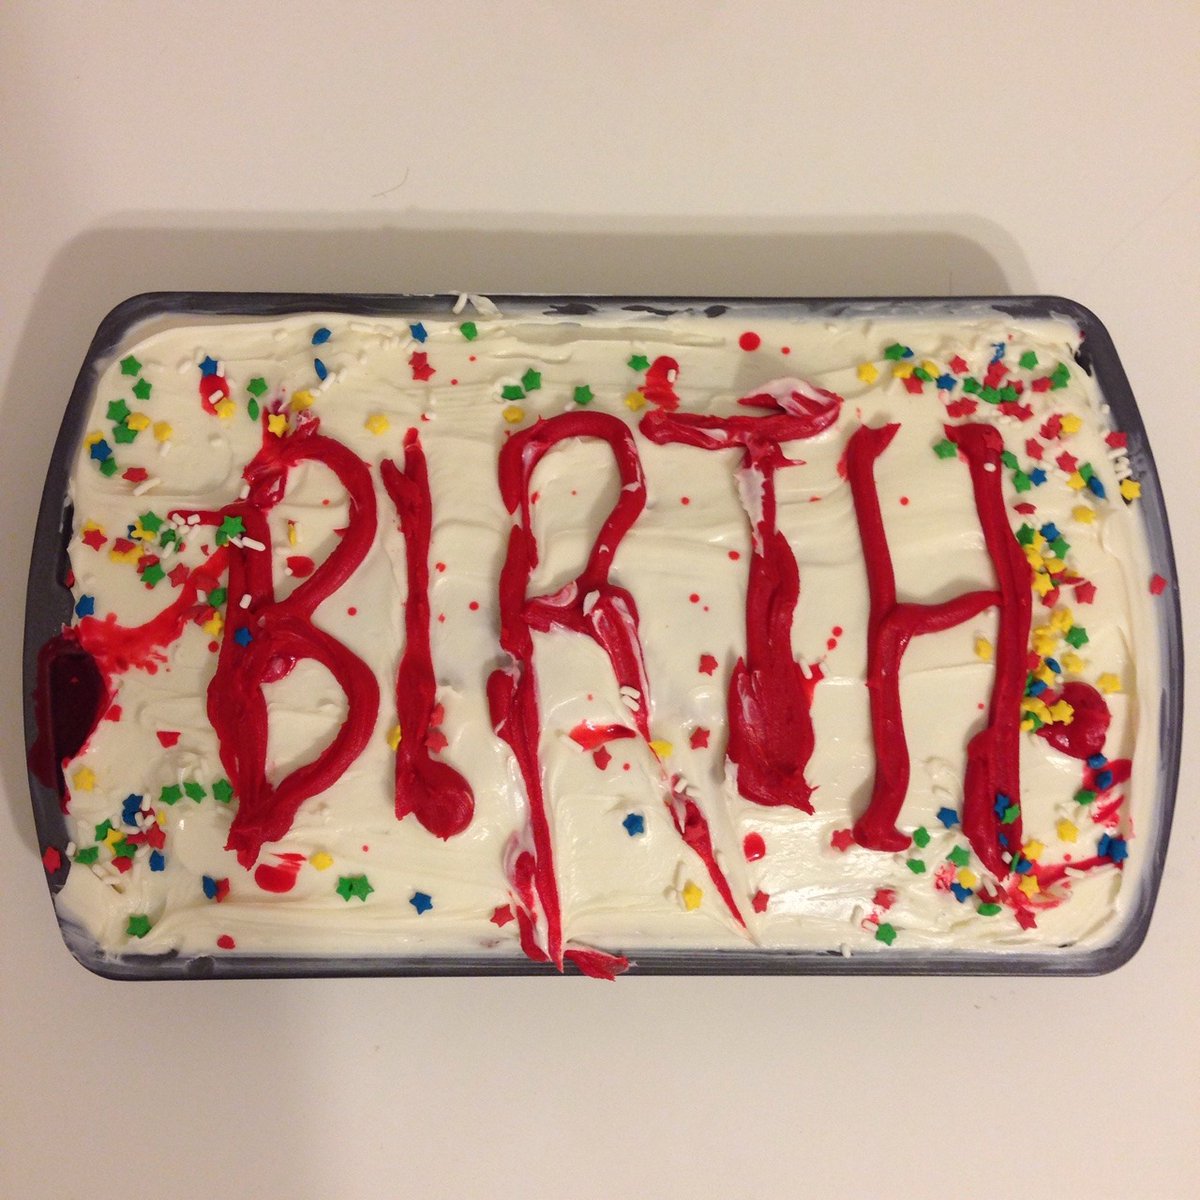 a very ominous cake with the word "BIRTH" written in red frosting...